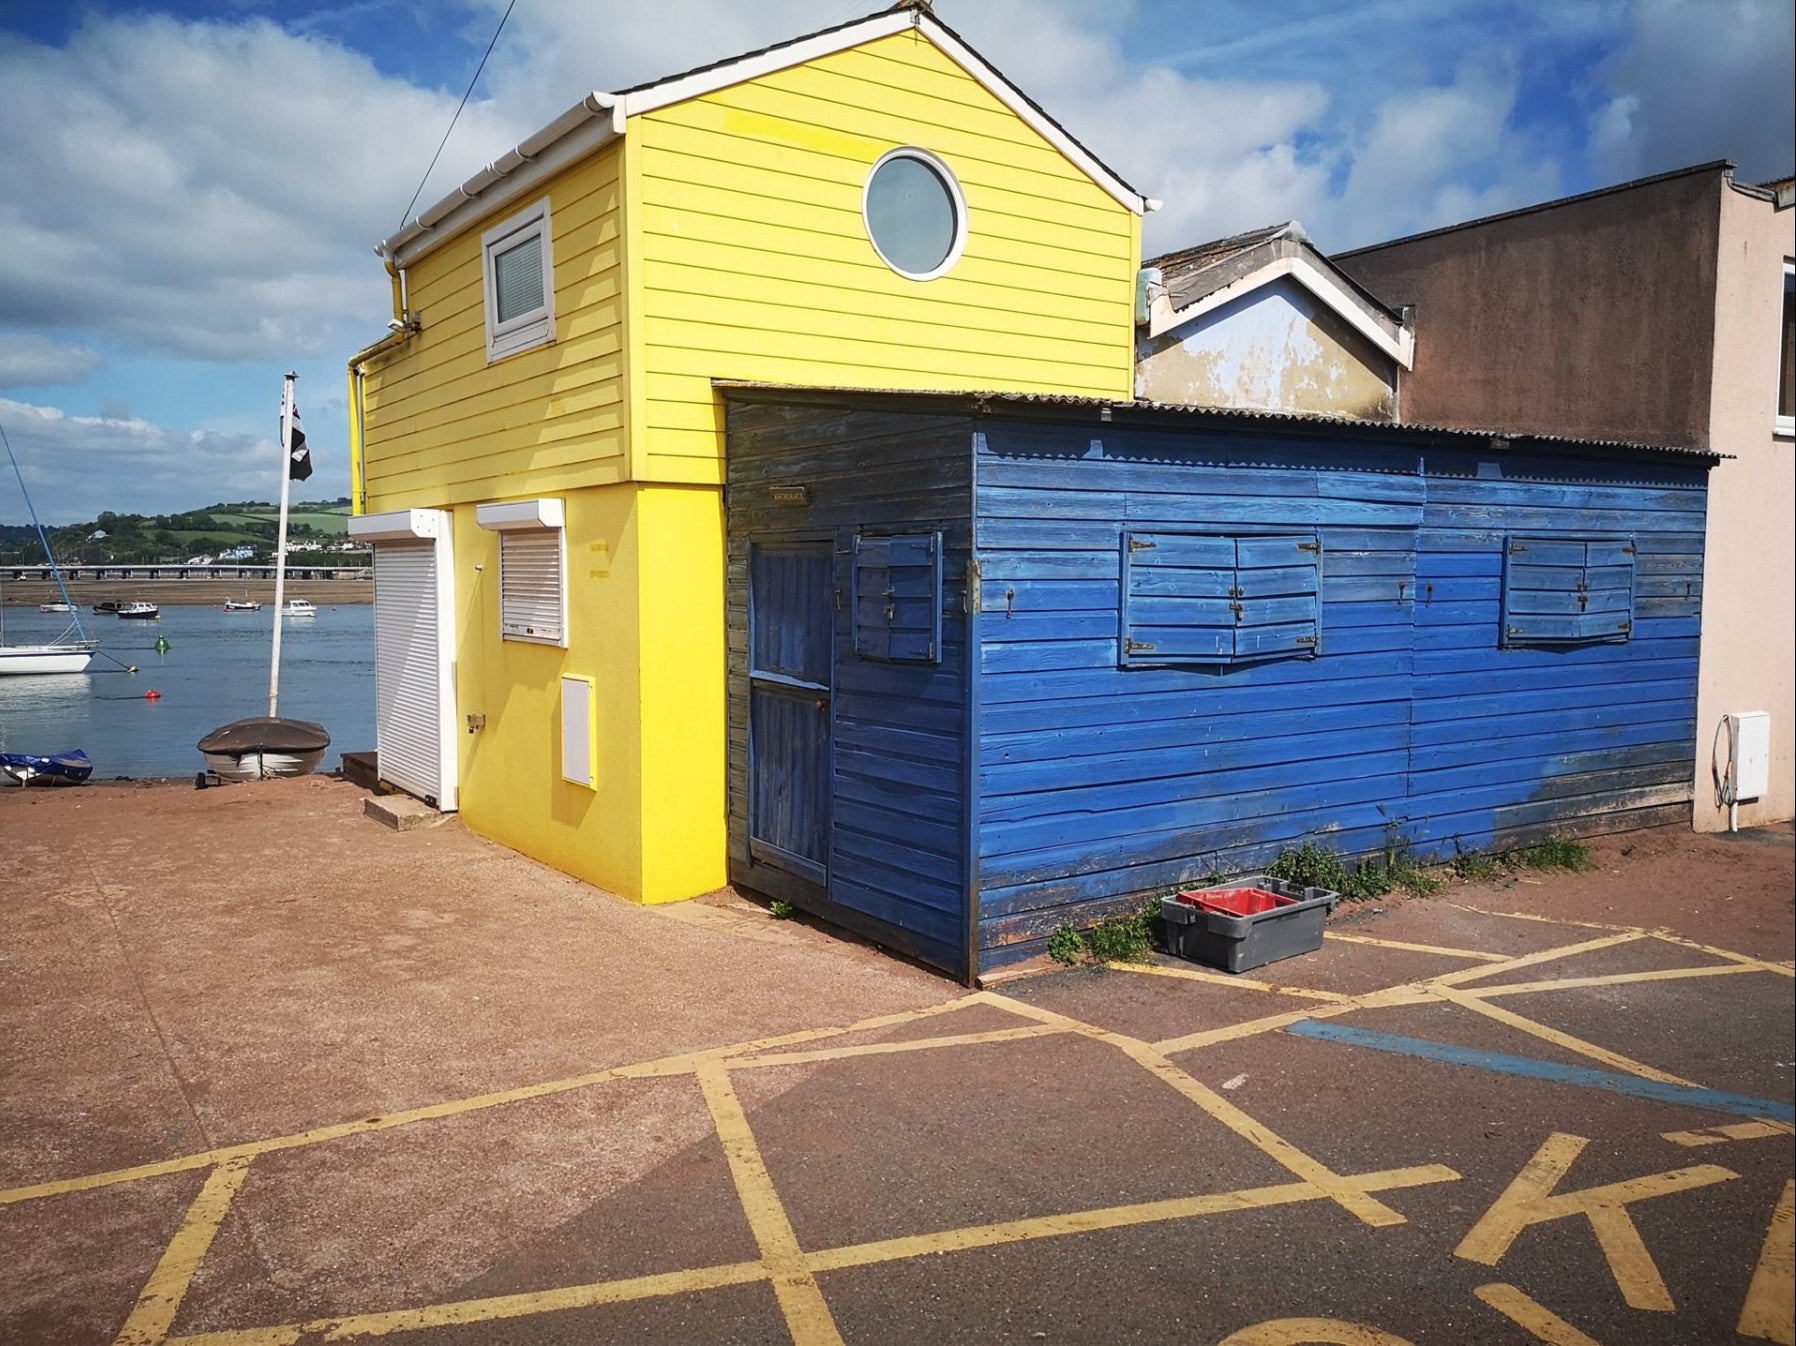 A blue shed attached to a yellow beach hut in Teignmouth, Devon, is up for sale for offers over £45,000